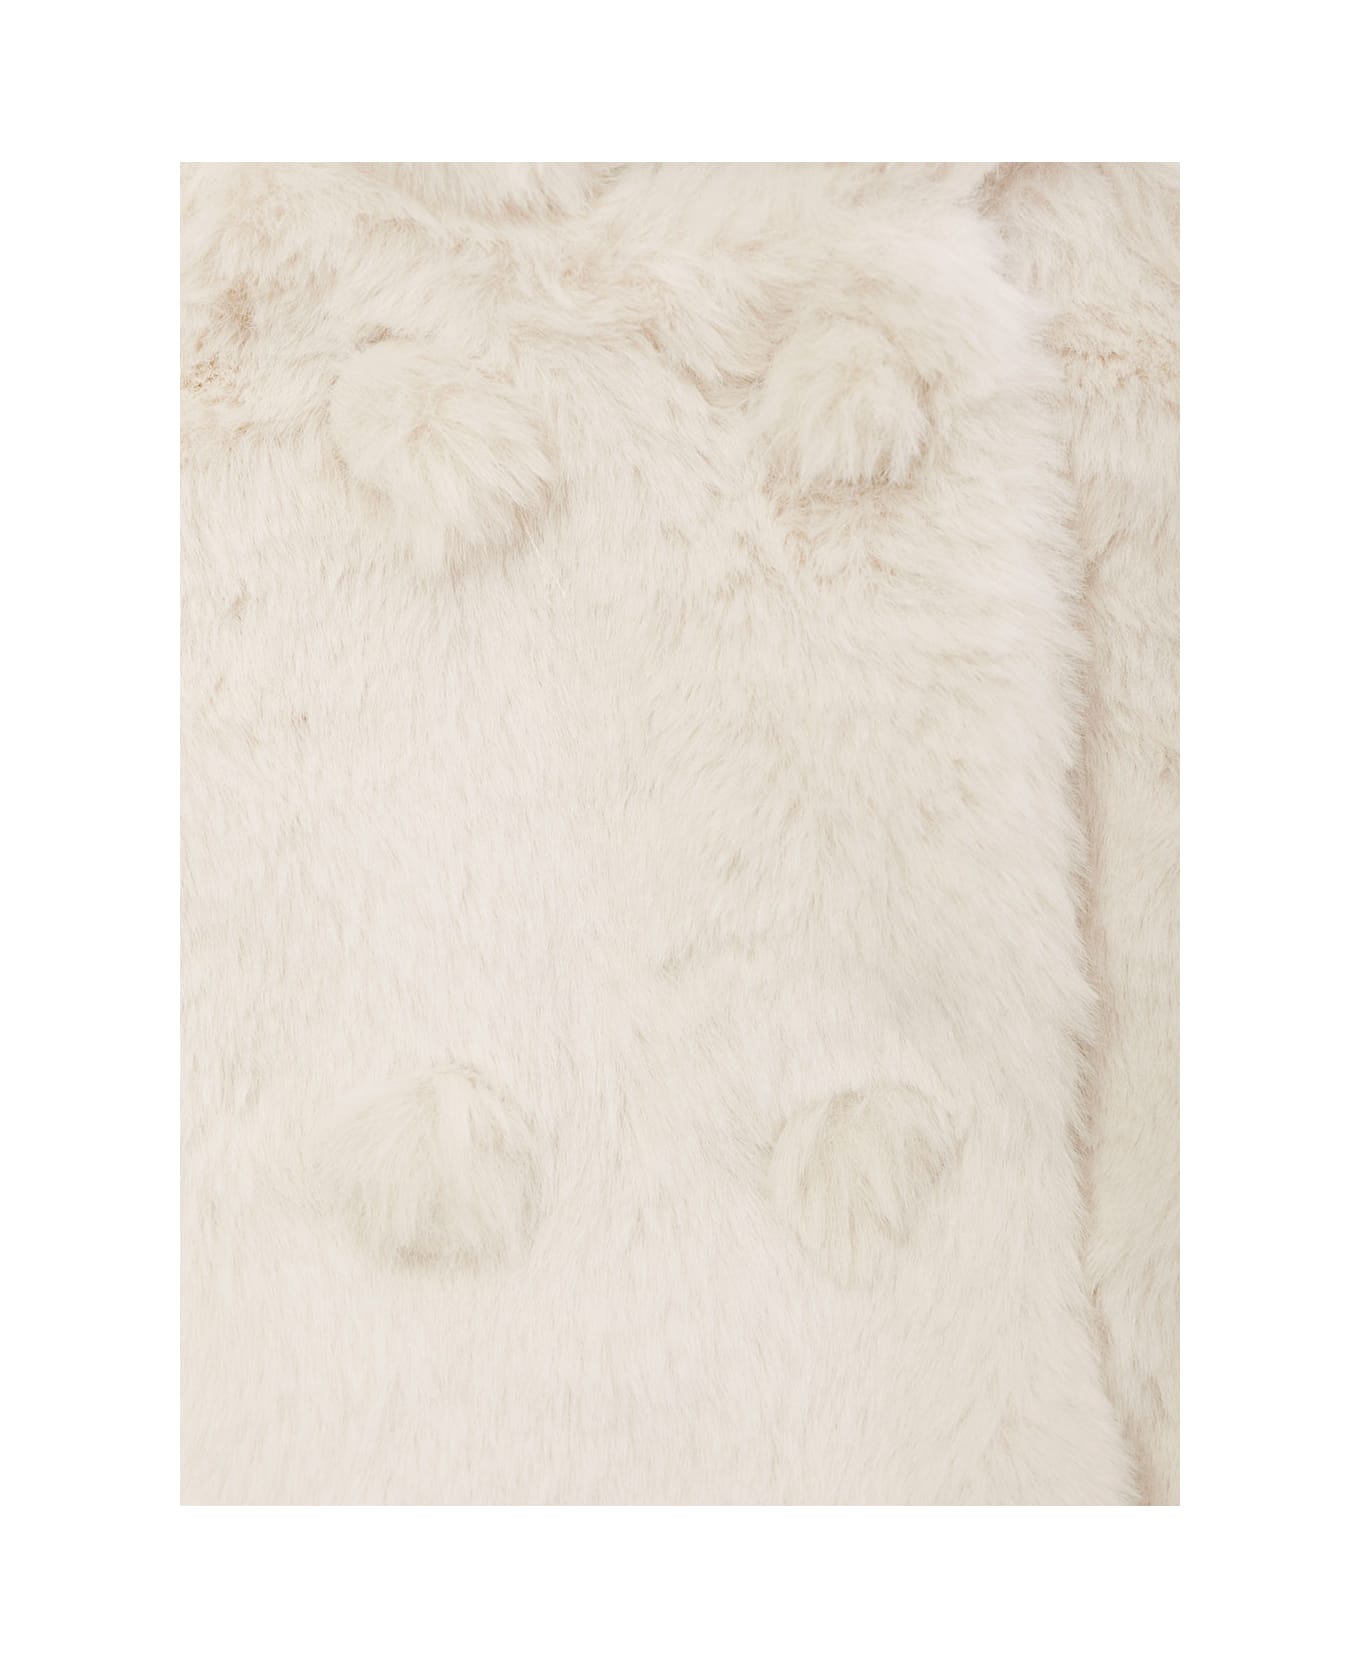 Il Gufo White Hooded Coat With Buttons In Faux Fur Baby - Naturale